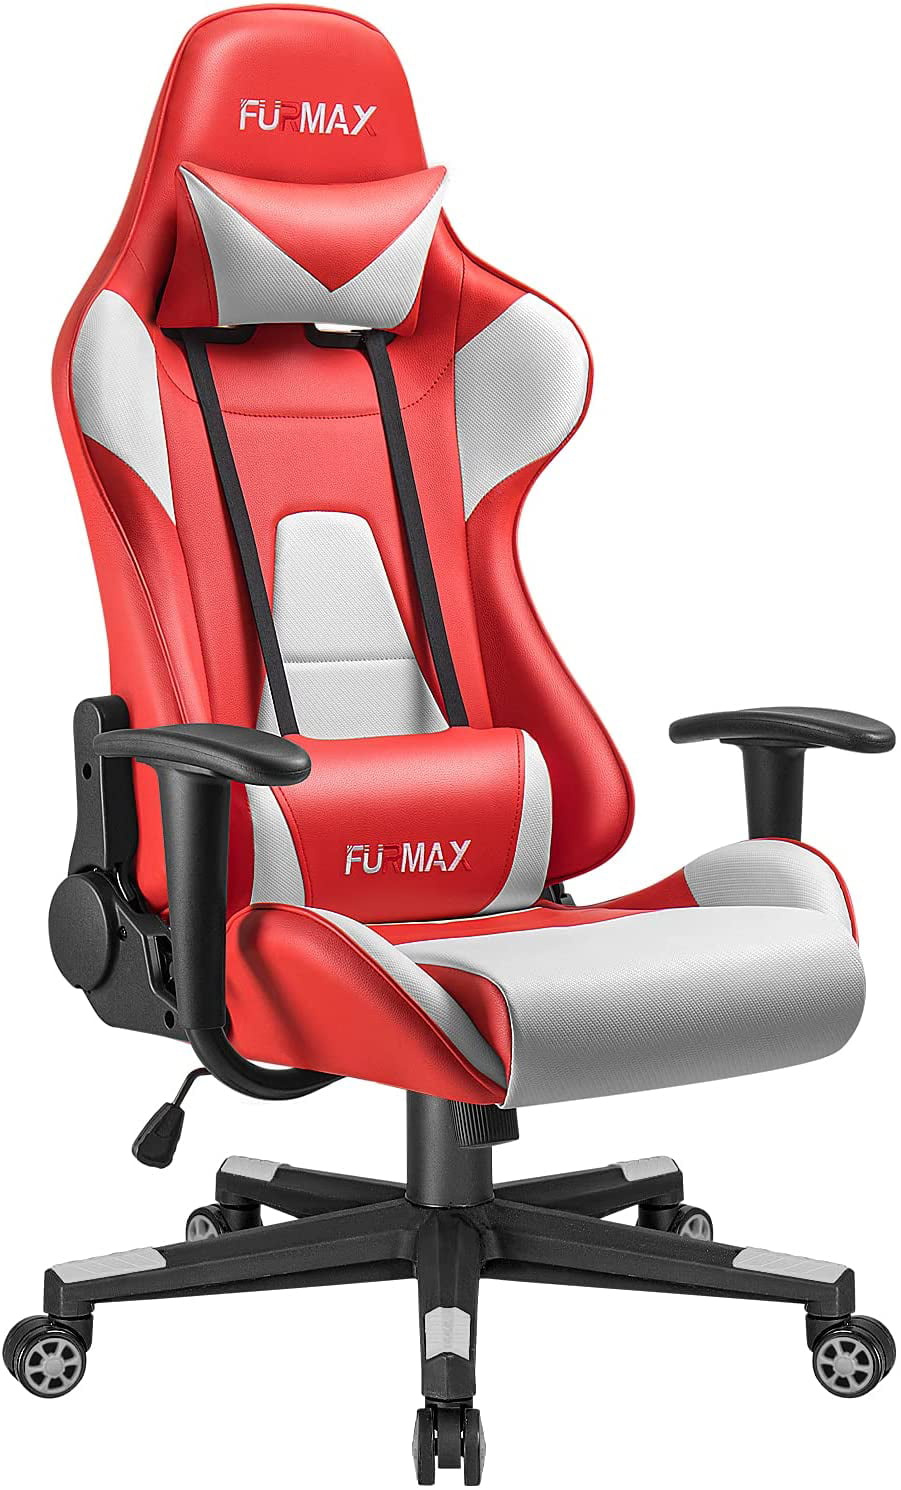 Executive High-back Office Chair Racer Gaming Chair Computer Leather Swivel Seat 